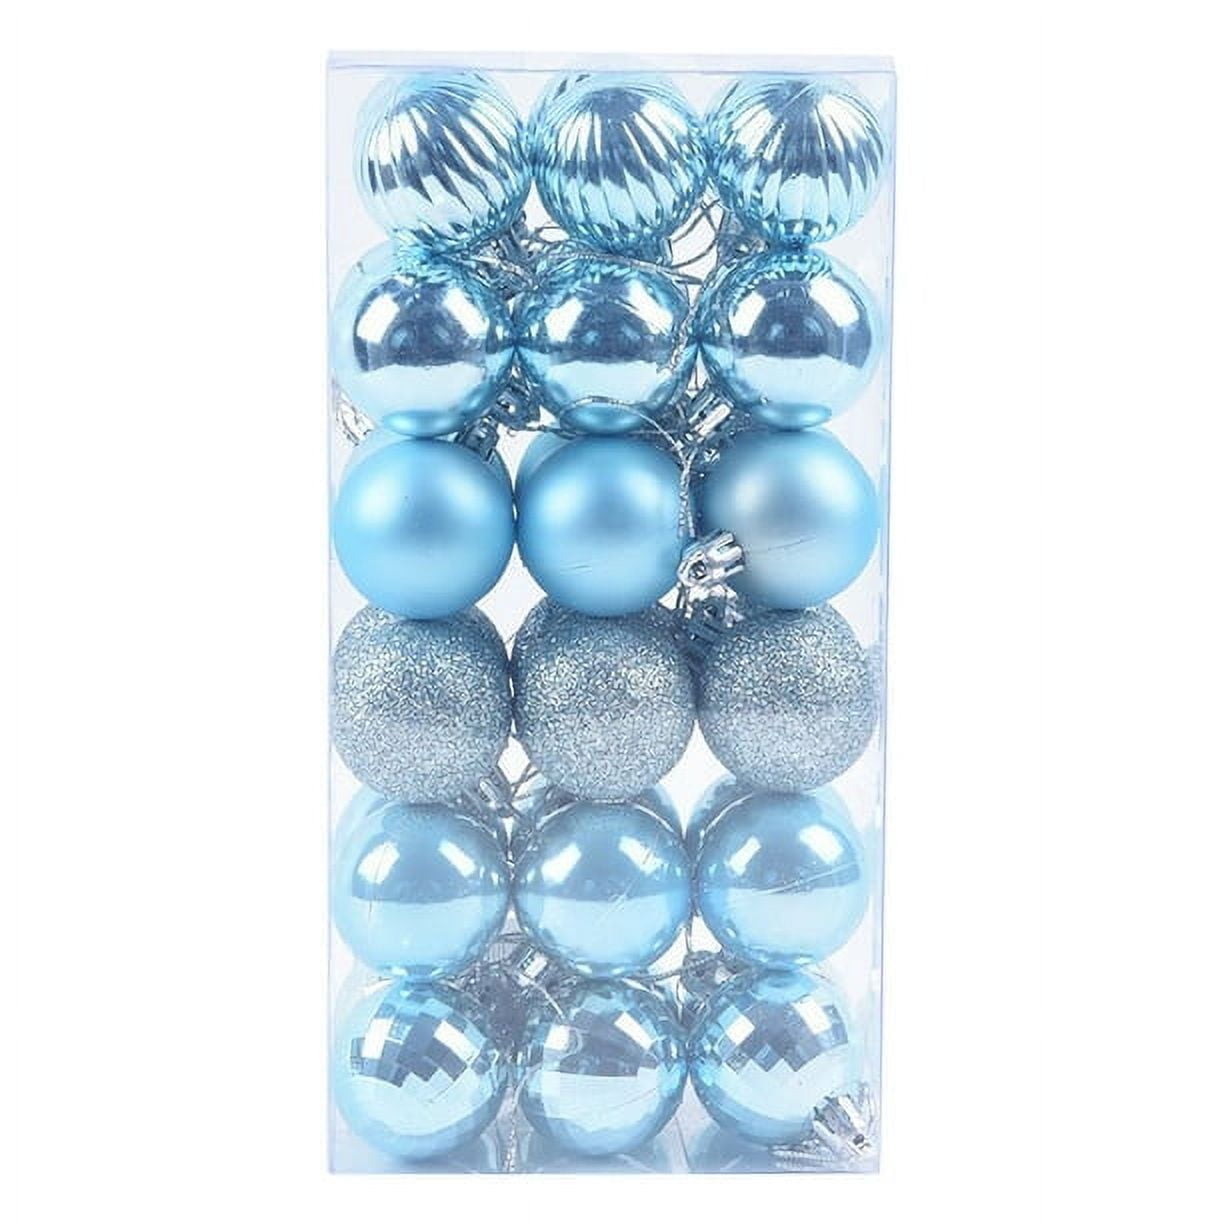 Wirziis Christmas Ornaments 36-Pack Christmas Ball Ornaments with ...